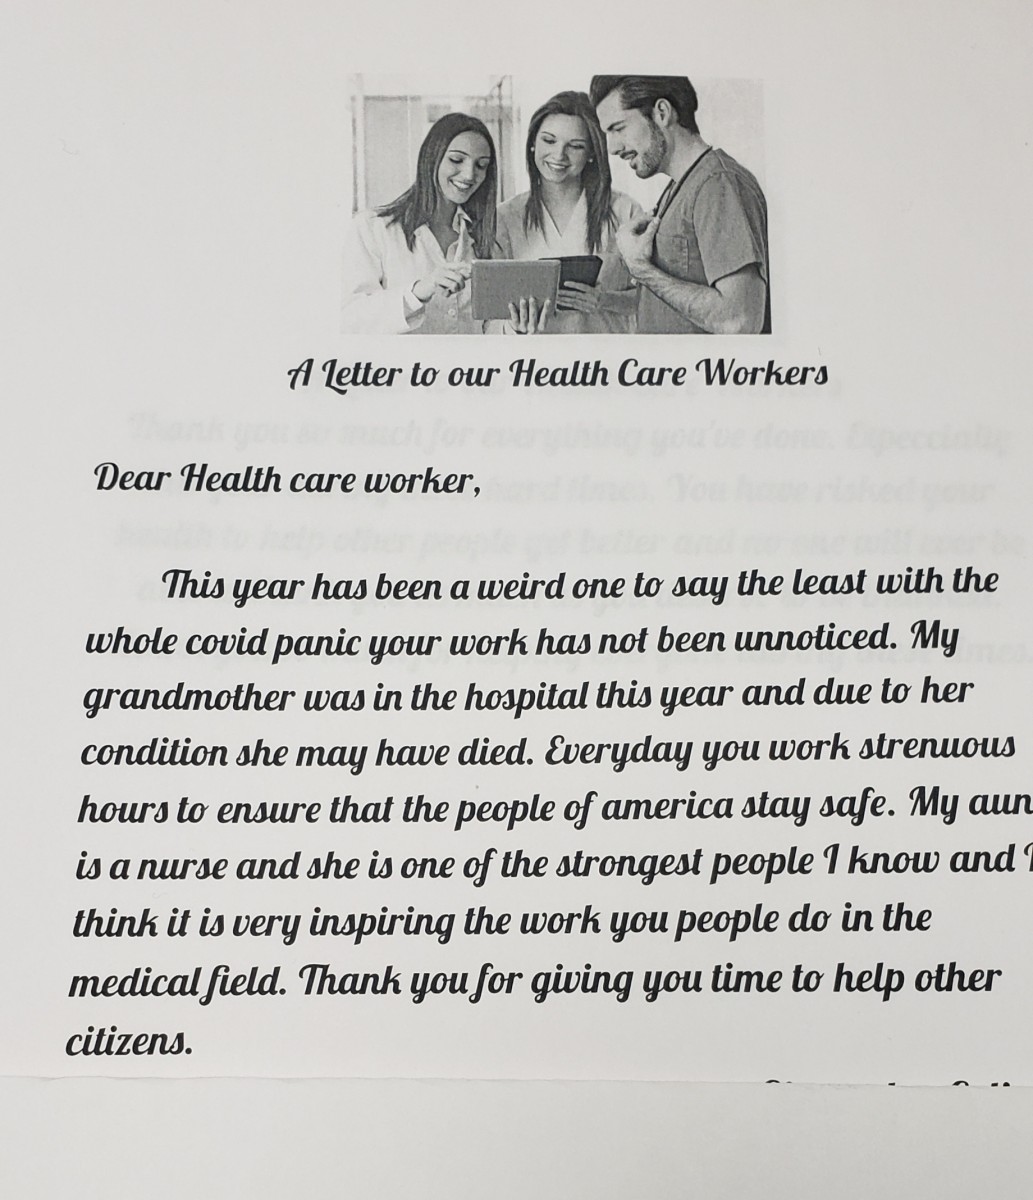 Letter to a healthcare worker from an 8th grade scholar at Heritage Middle School.